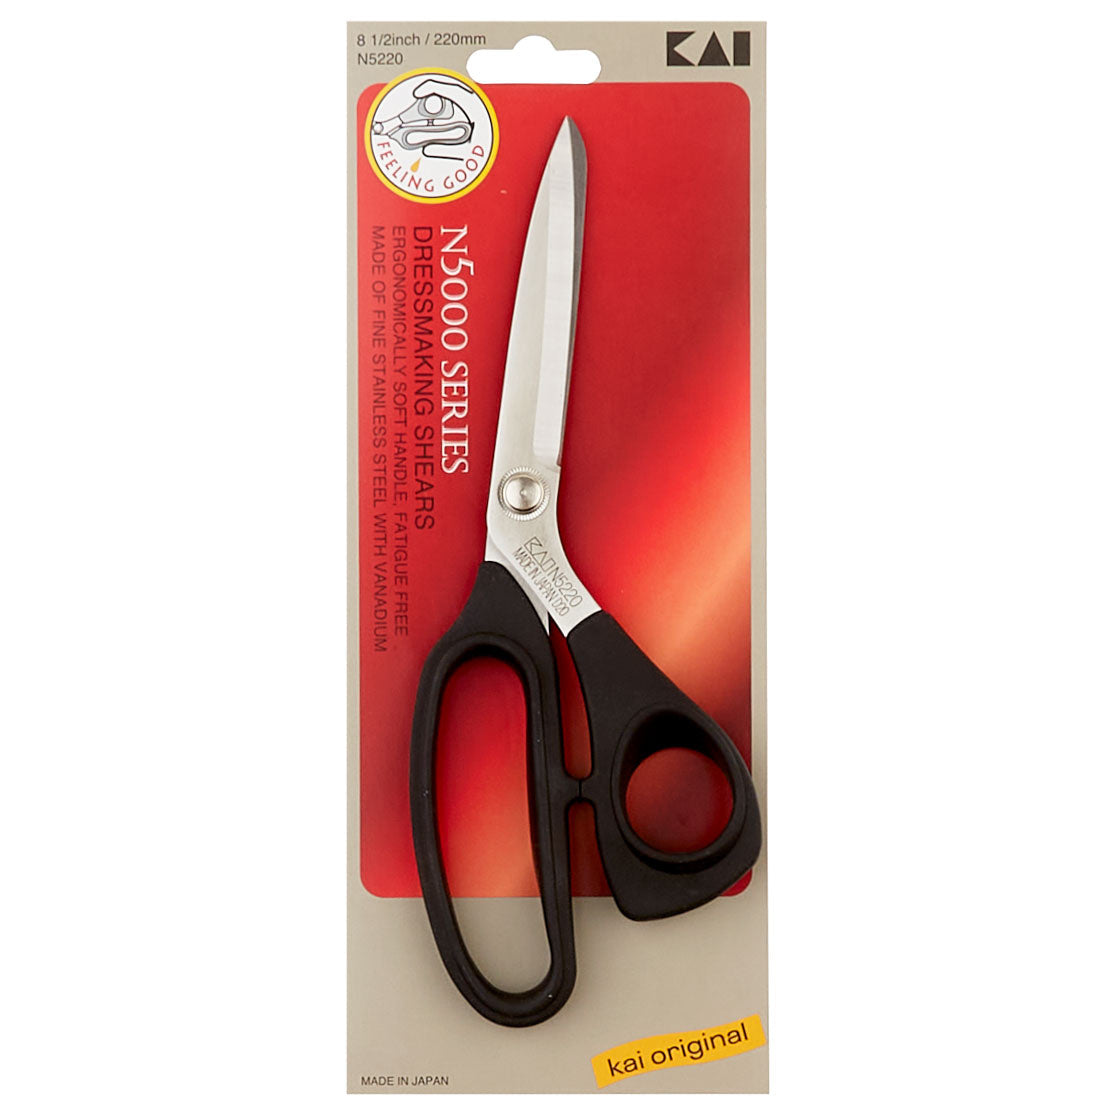 SCISSORS HIGH QUALITY STAINLESS STEEL - Ribbon & Blues